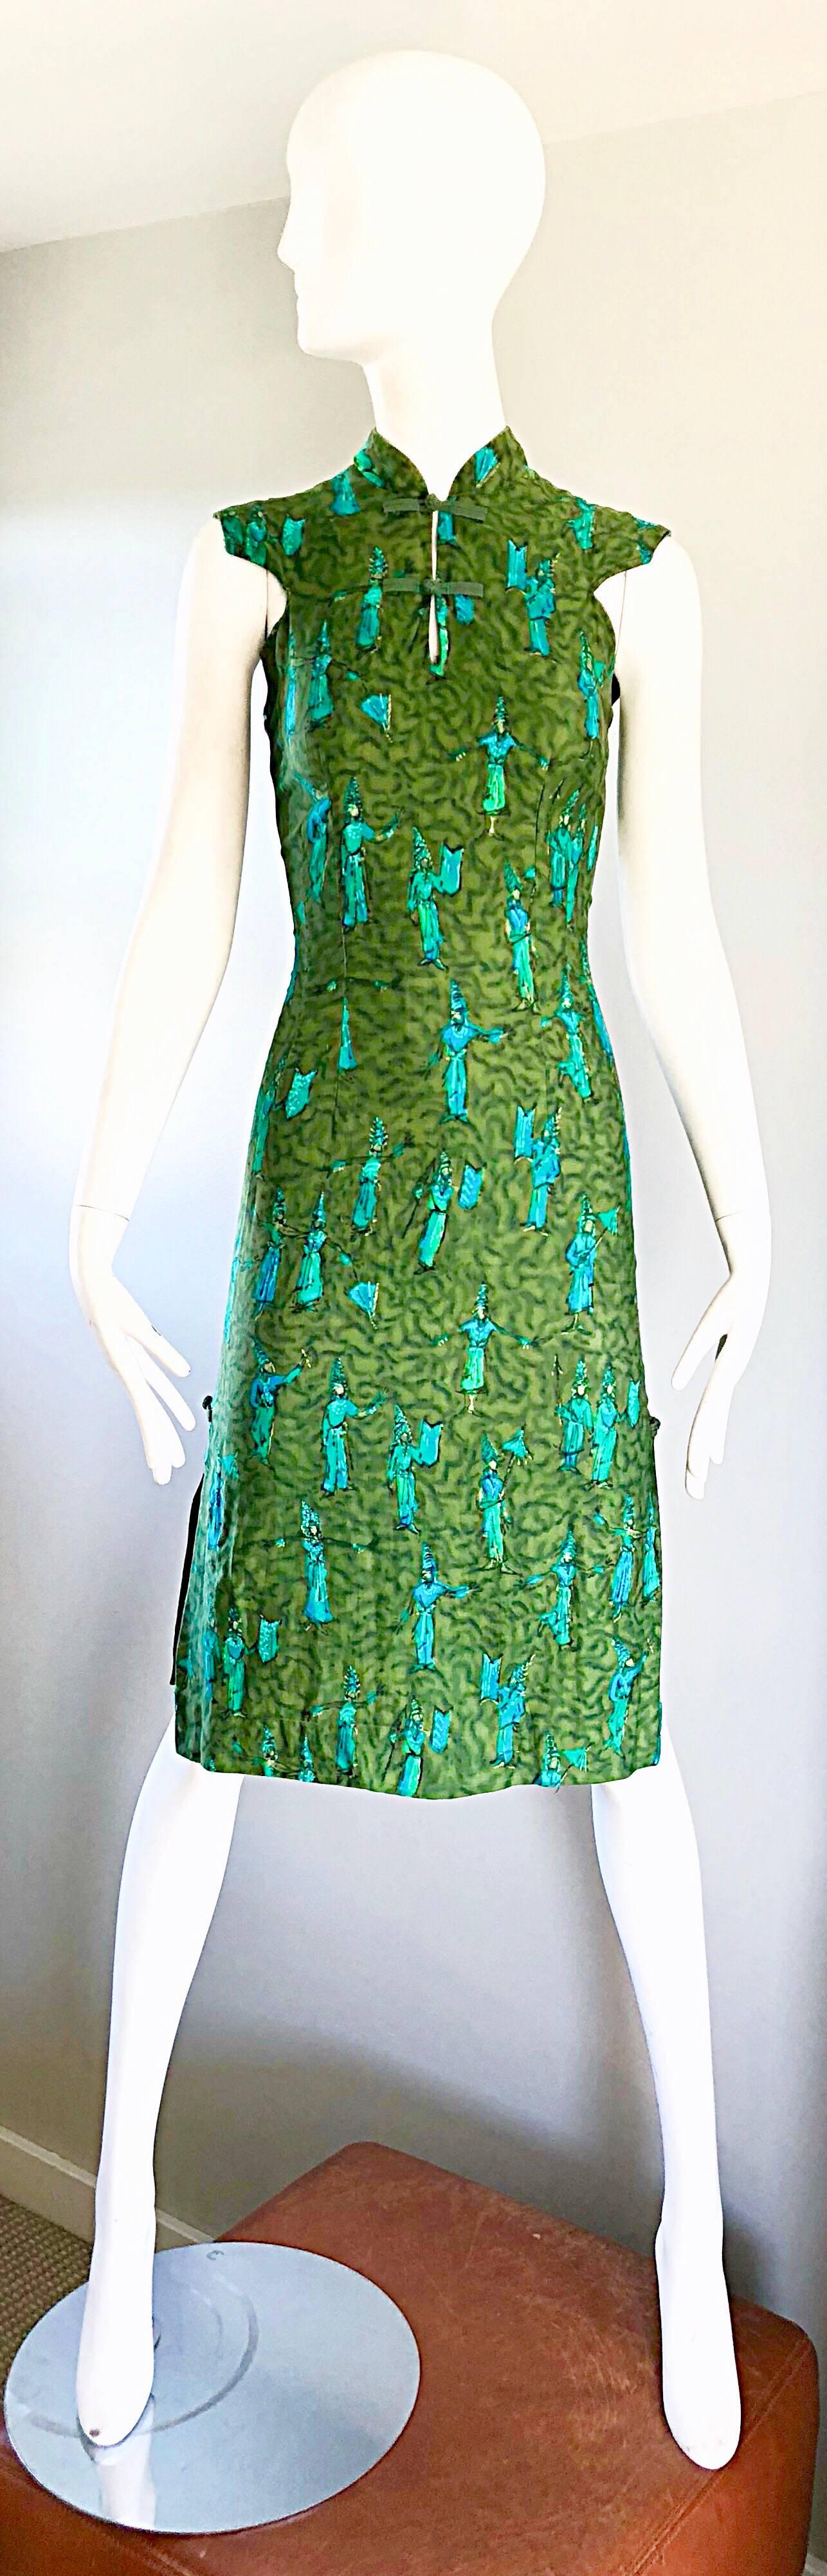 Sensational and super rare 1960s demi couture cheongsam novelty print cotton dress! Features vibrant colors of avocado green, lime / neon green and turquoise blue. Features Balinese / Polynesian / South East Asian dancers throughout. Signature knot